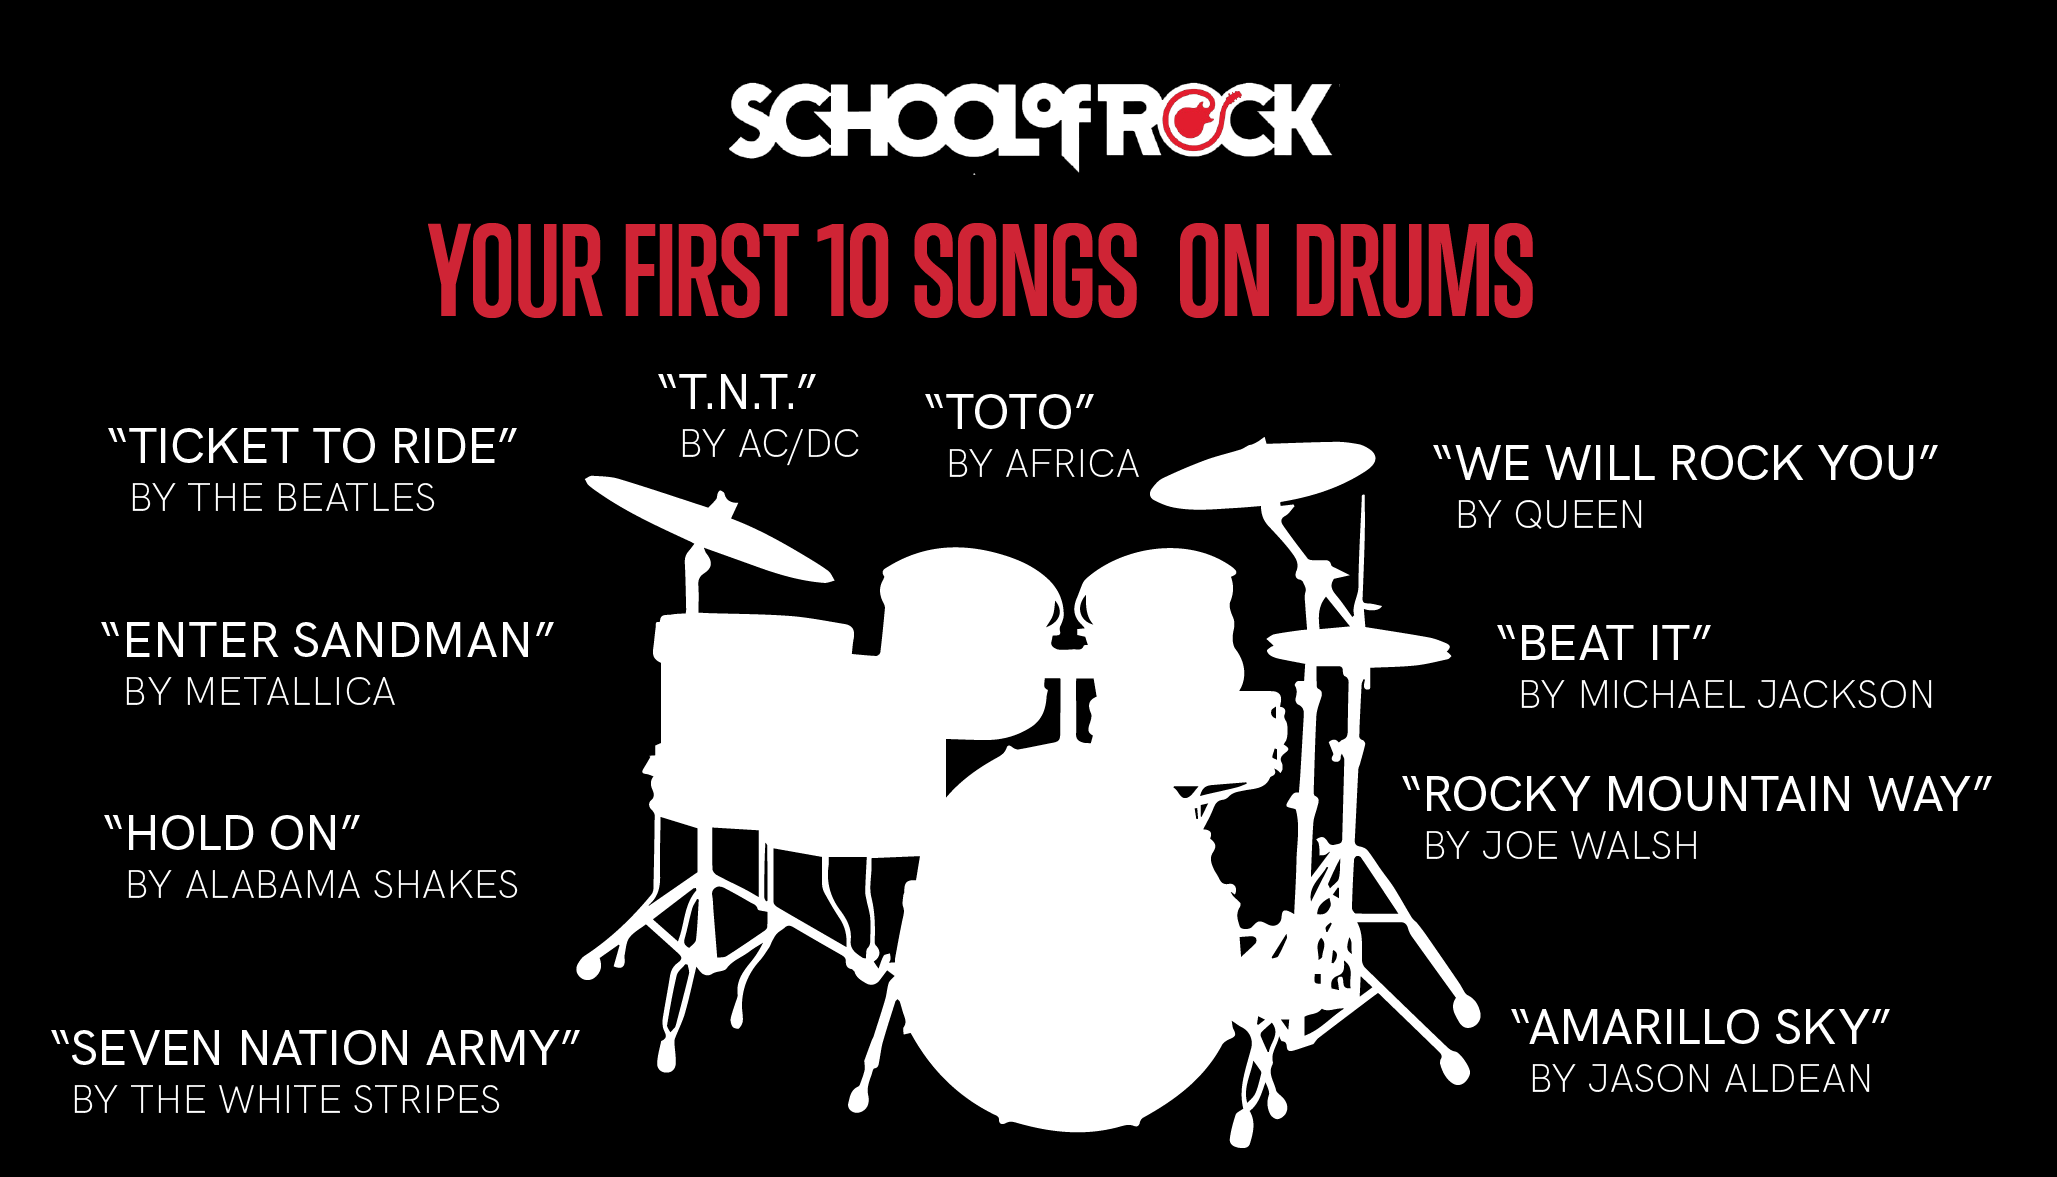 Your First 10 Songs on Drums: “T.N.T.” by AC/DC, “Toto” by Africa, “We Will Rock You” by Queen, “Beat It” by Michael Jackson,” “Rocky Mountain Way” by Joe Walsh, “Amarillo Sky” by Jason Aldean, “Seven Nation Army” by The White Stripes, “Hold On” by Alabam